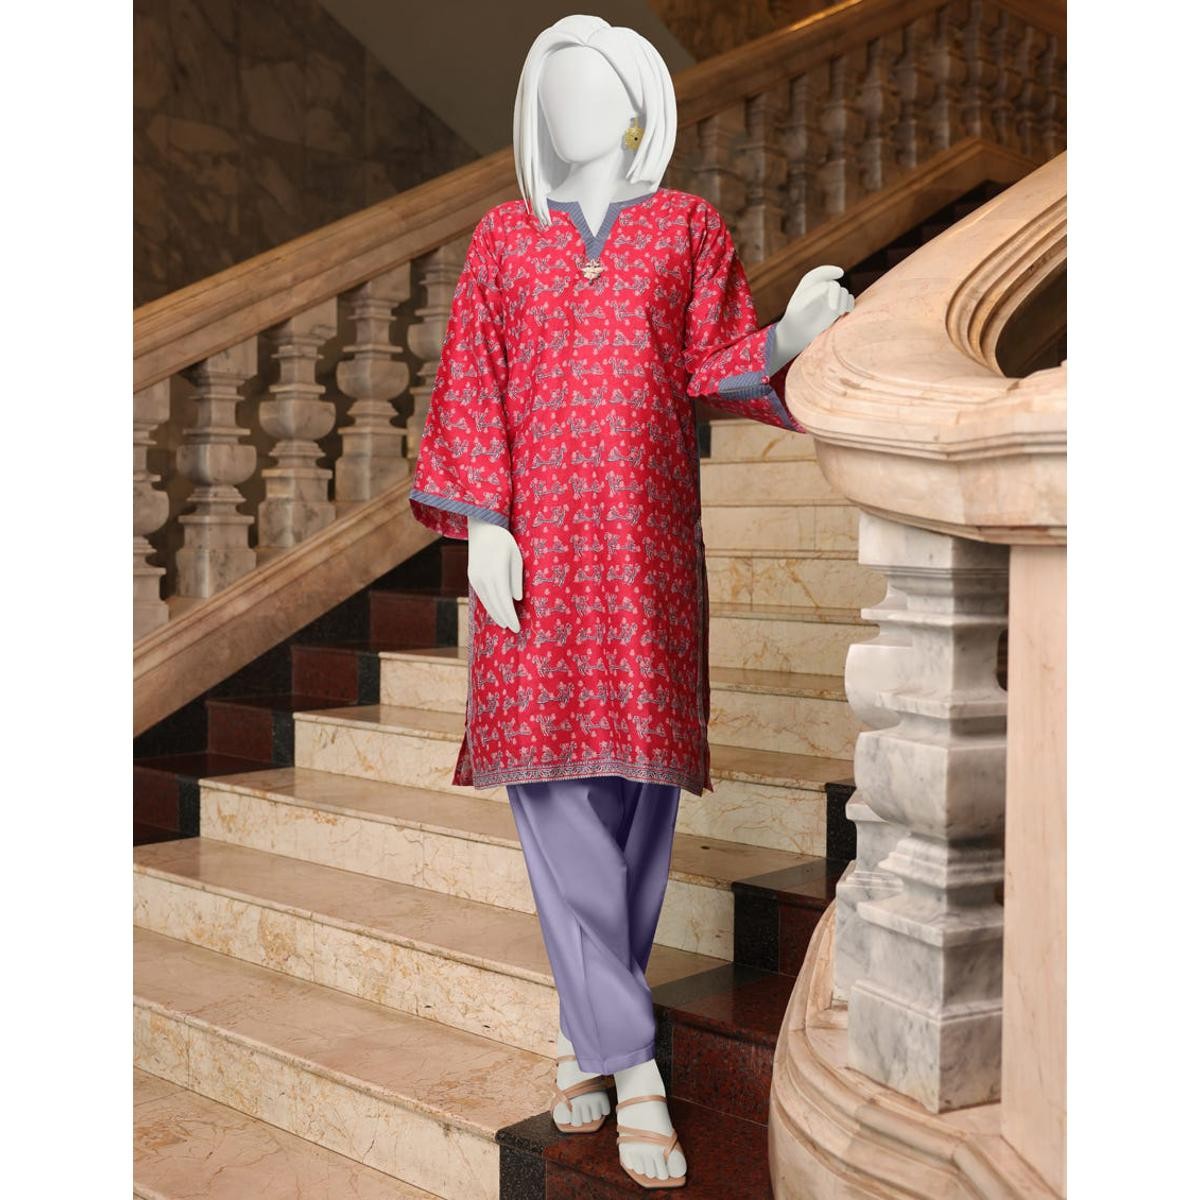 /2022/12/junaid-jamshed-1-piece-cambric-women-unstitched-suit-winter-collection-22-365785542_pk-1818258433-image1.jpeg